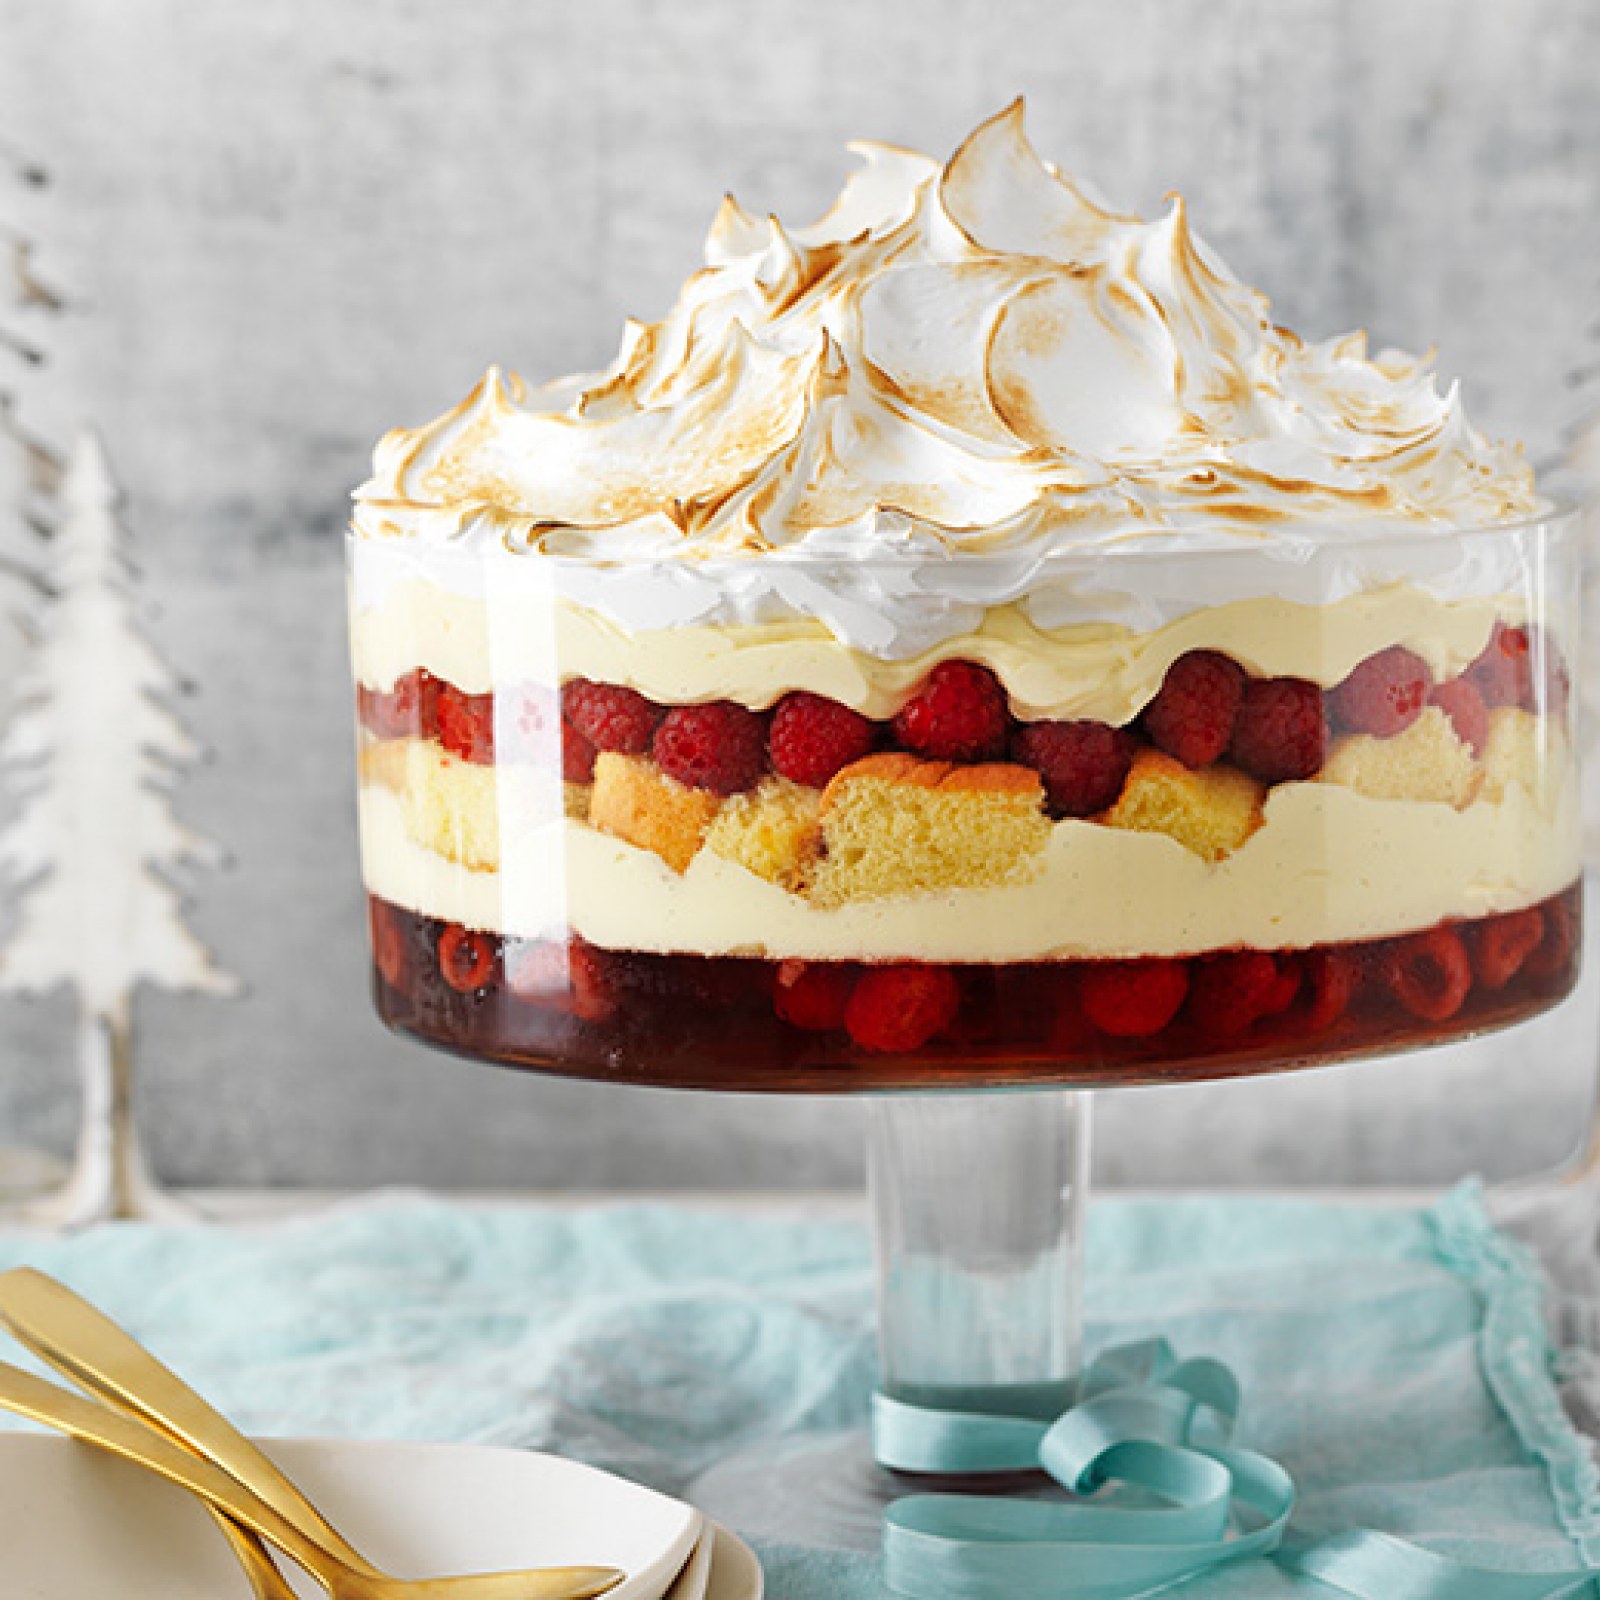 Berry Trifle Recipe: How to Make It